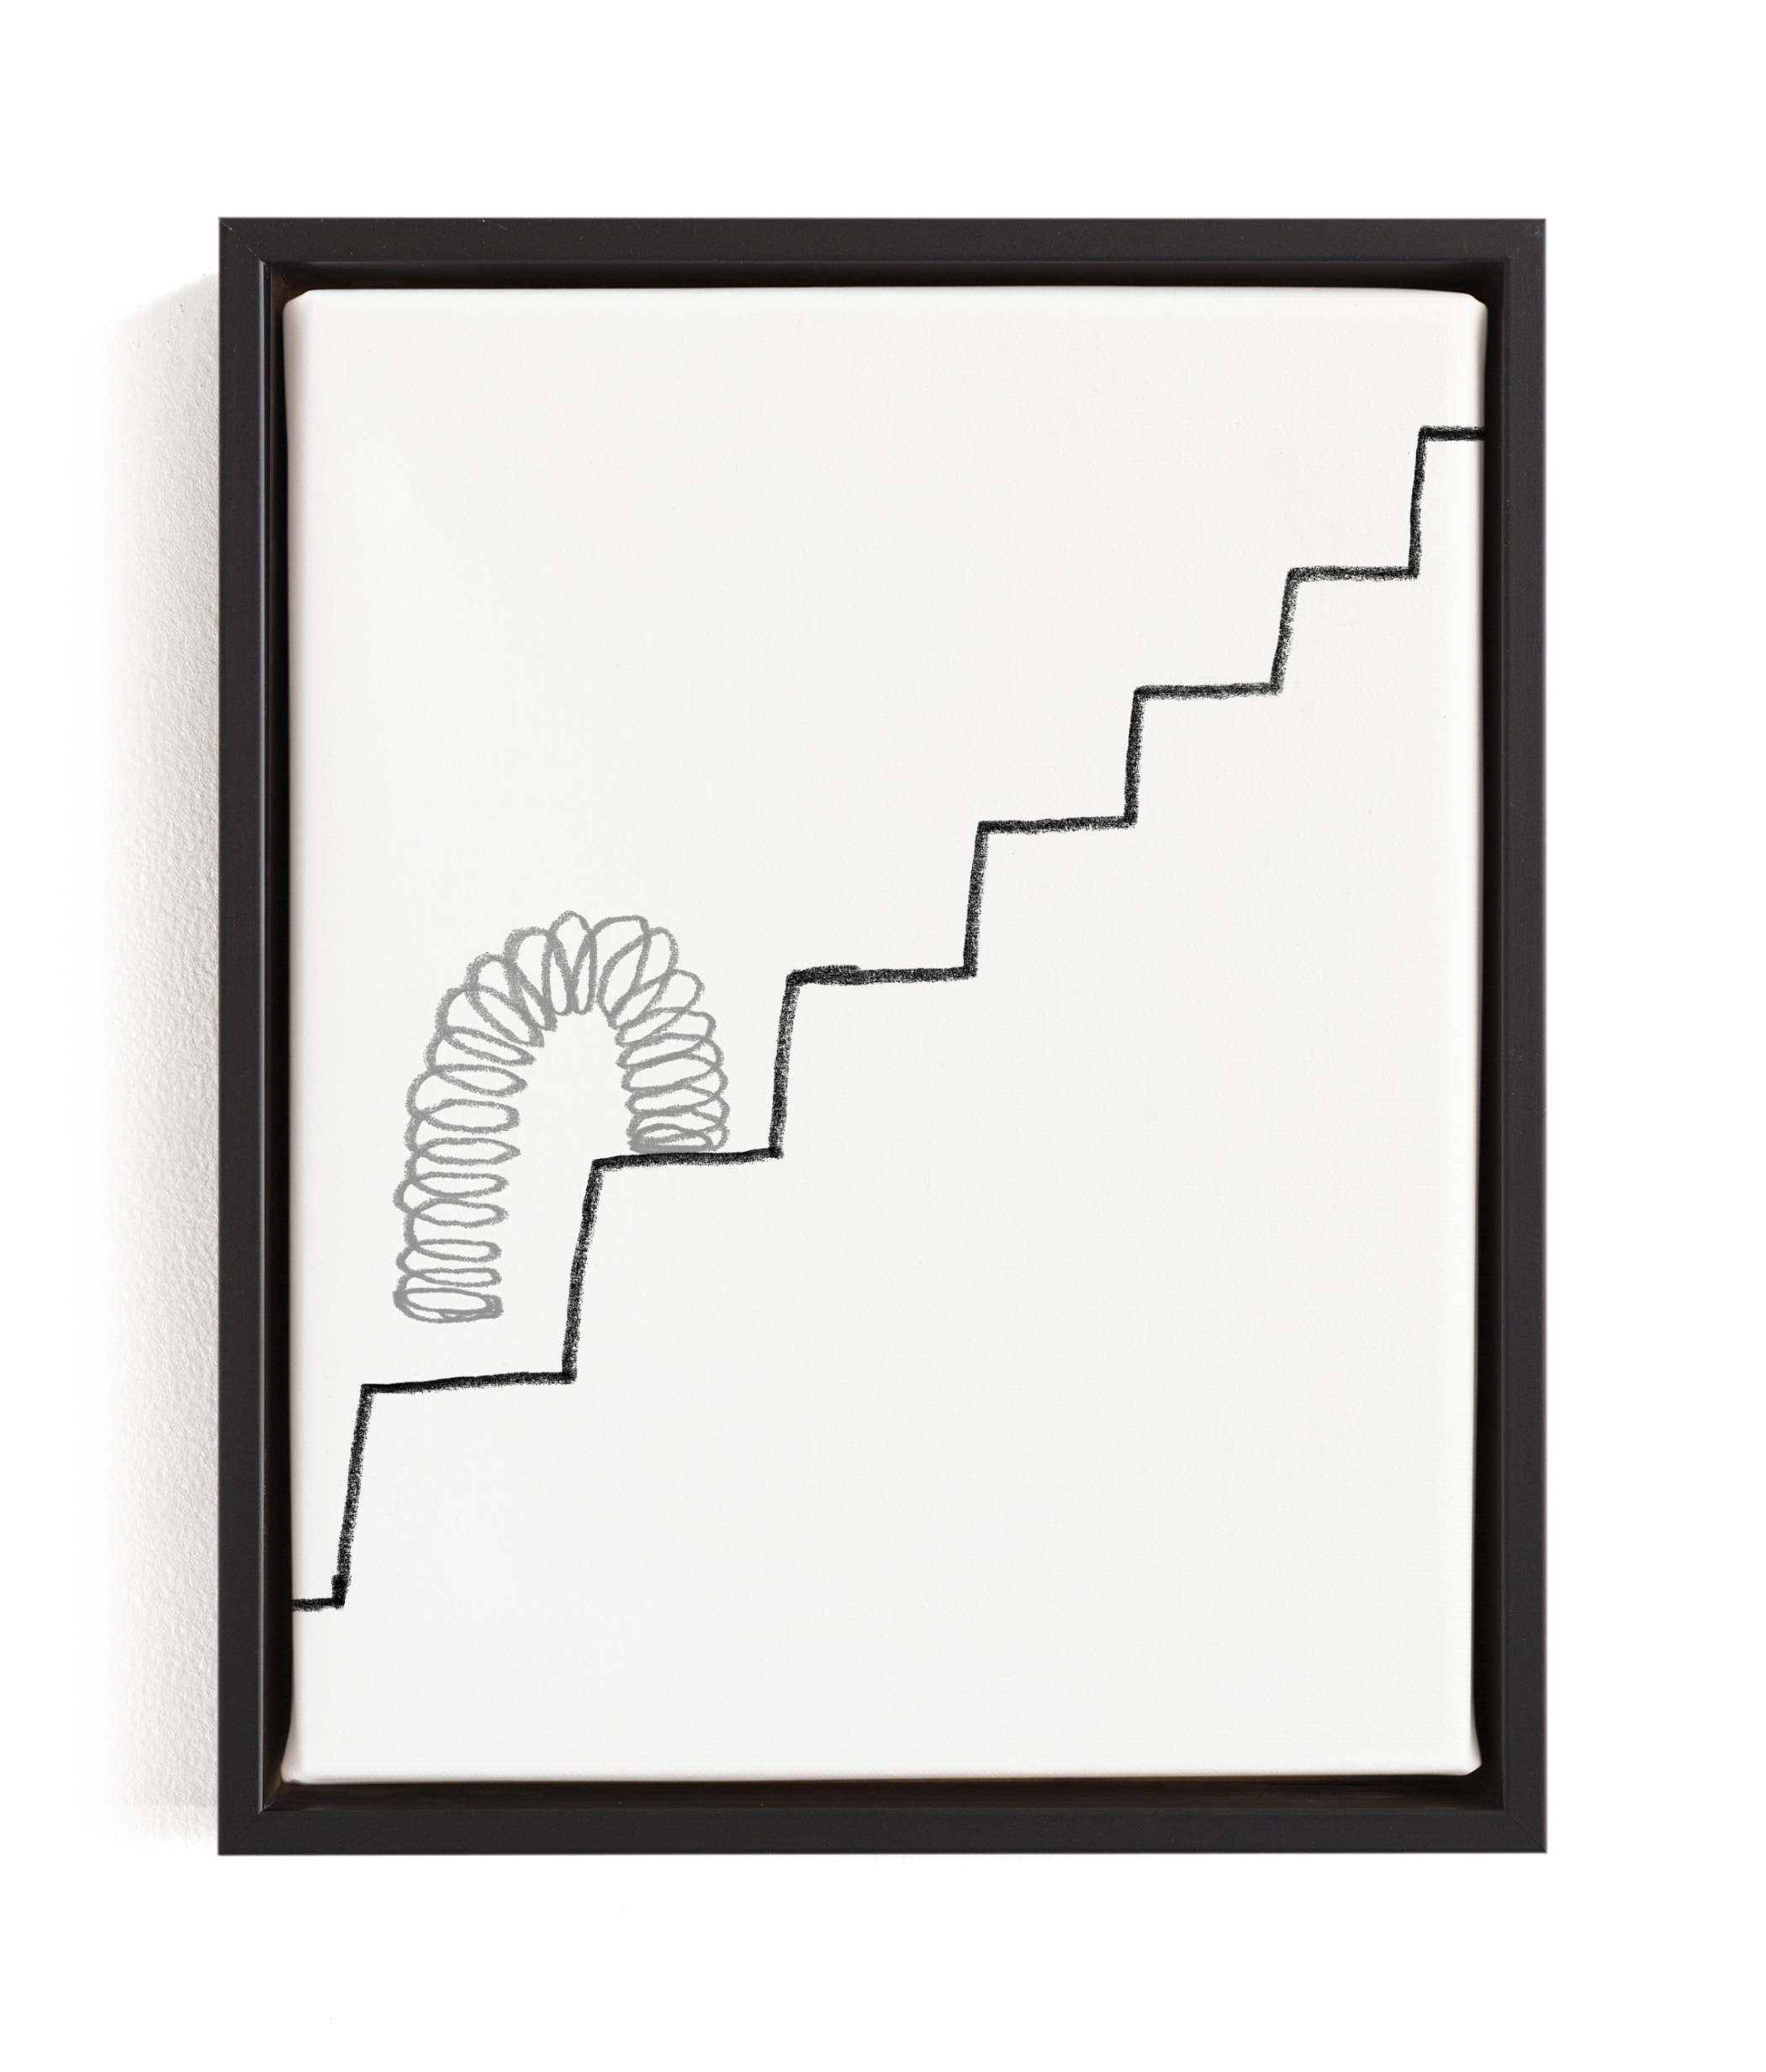 Slinky On The Stairs Art Print - Image 0